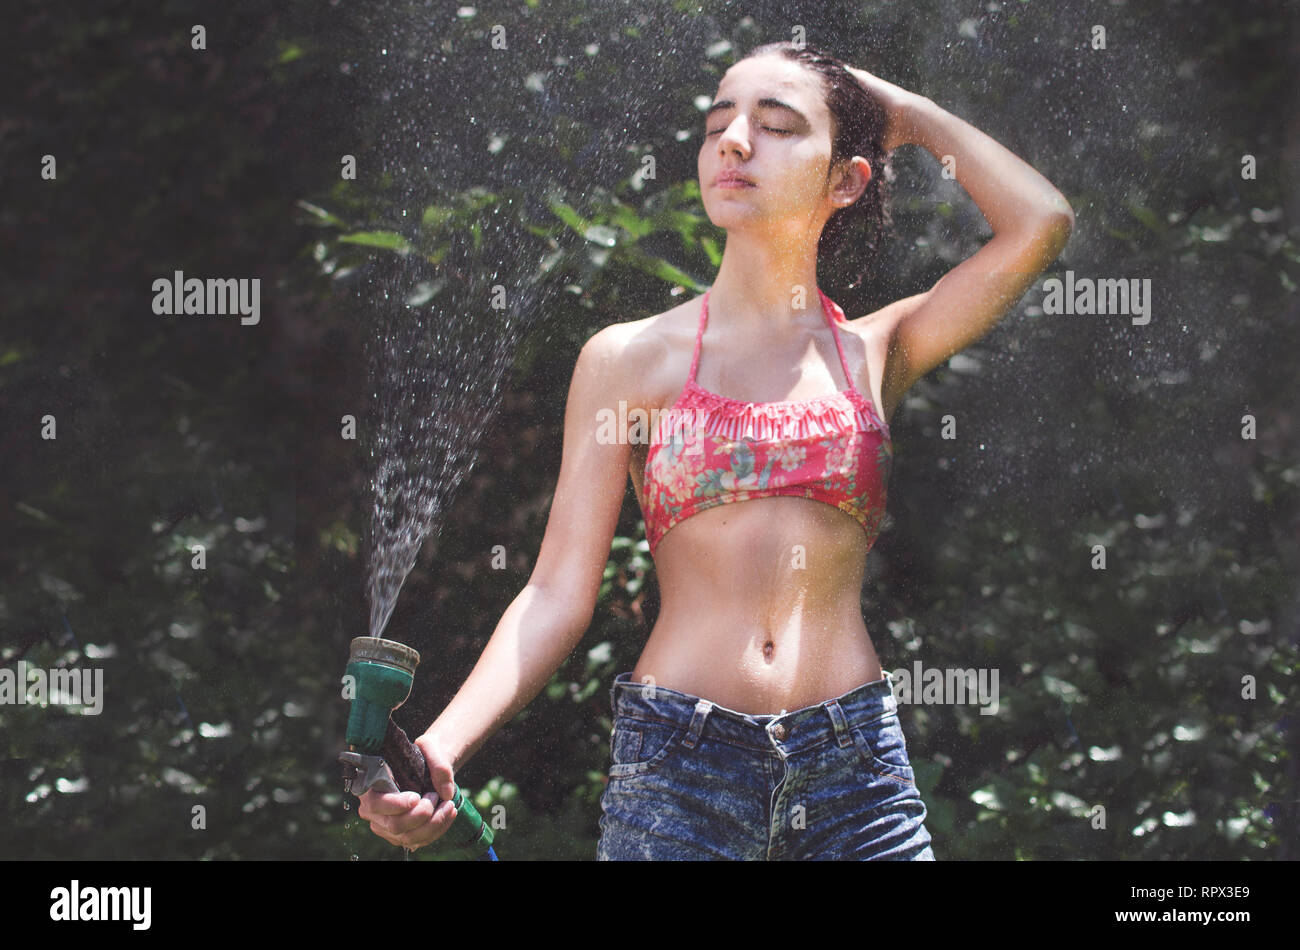 Girl standing in the garden on a hot day with a water hose Stock Photo